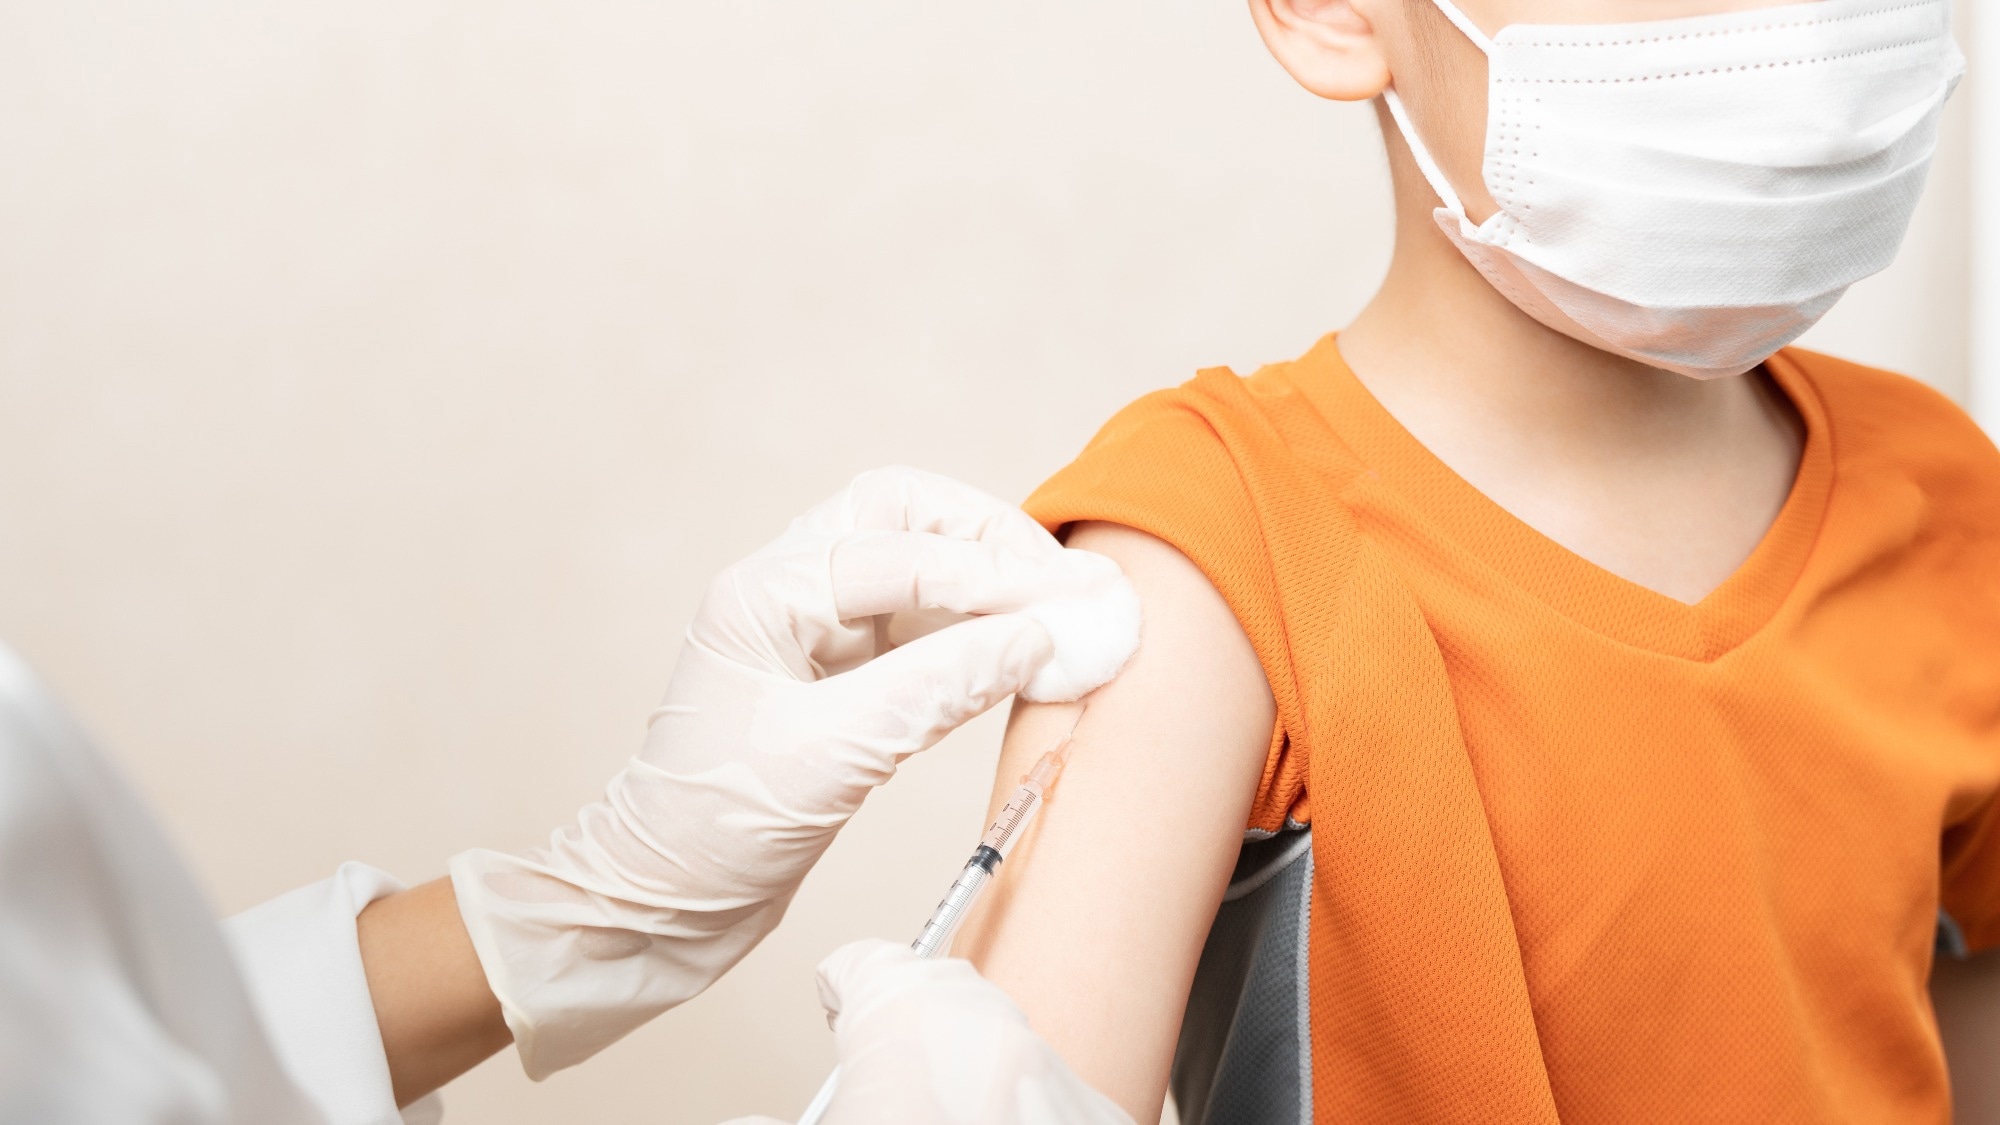 Study: Parental refusal and hesitancy of vaccinating children against COVID-19: Findings from a nationally representative sample of parents in the U.S. (PDF attached). Image Credit: myboys.me/Shutterstock